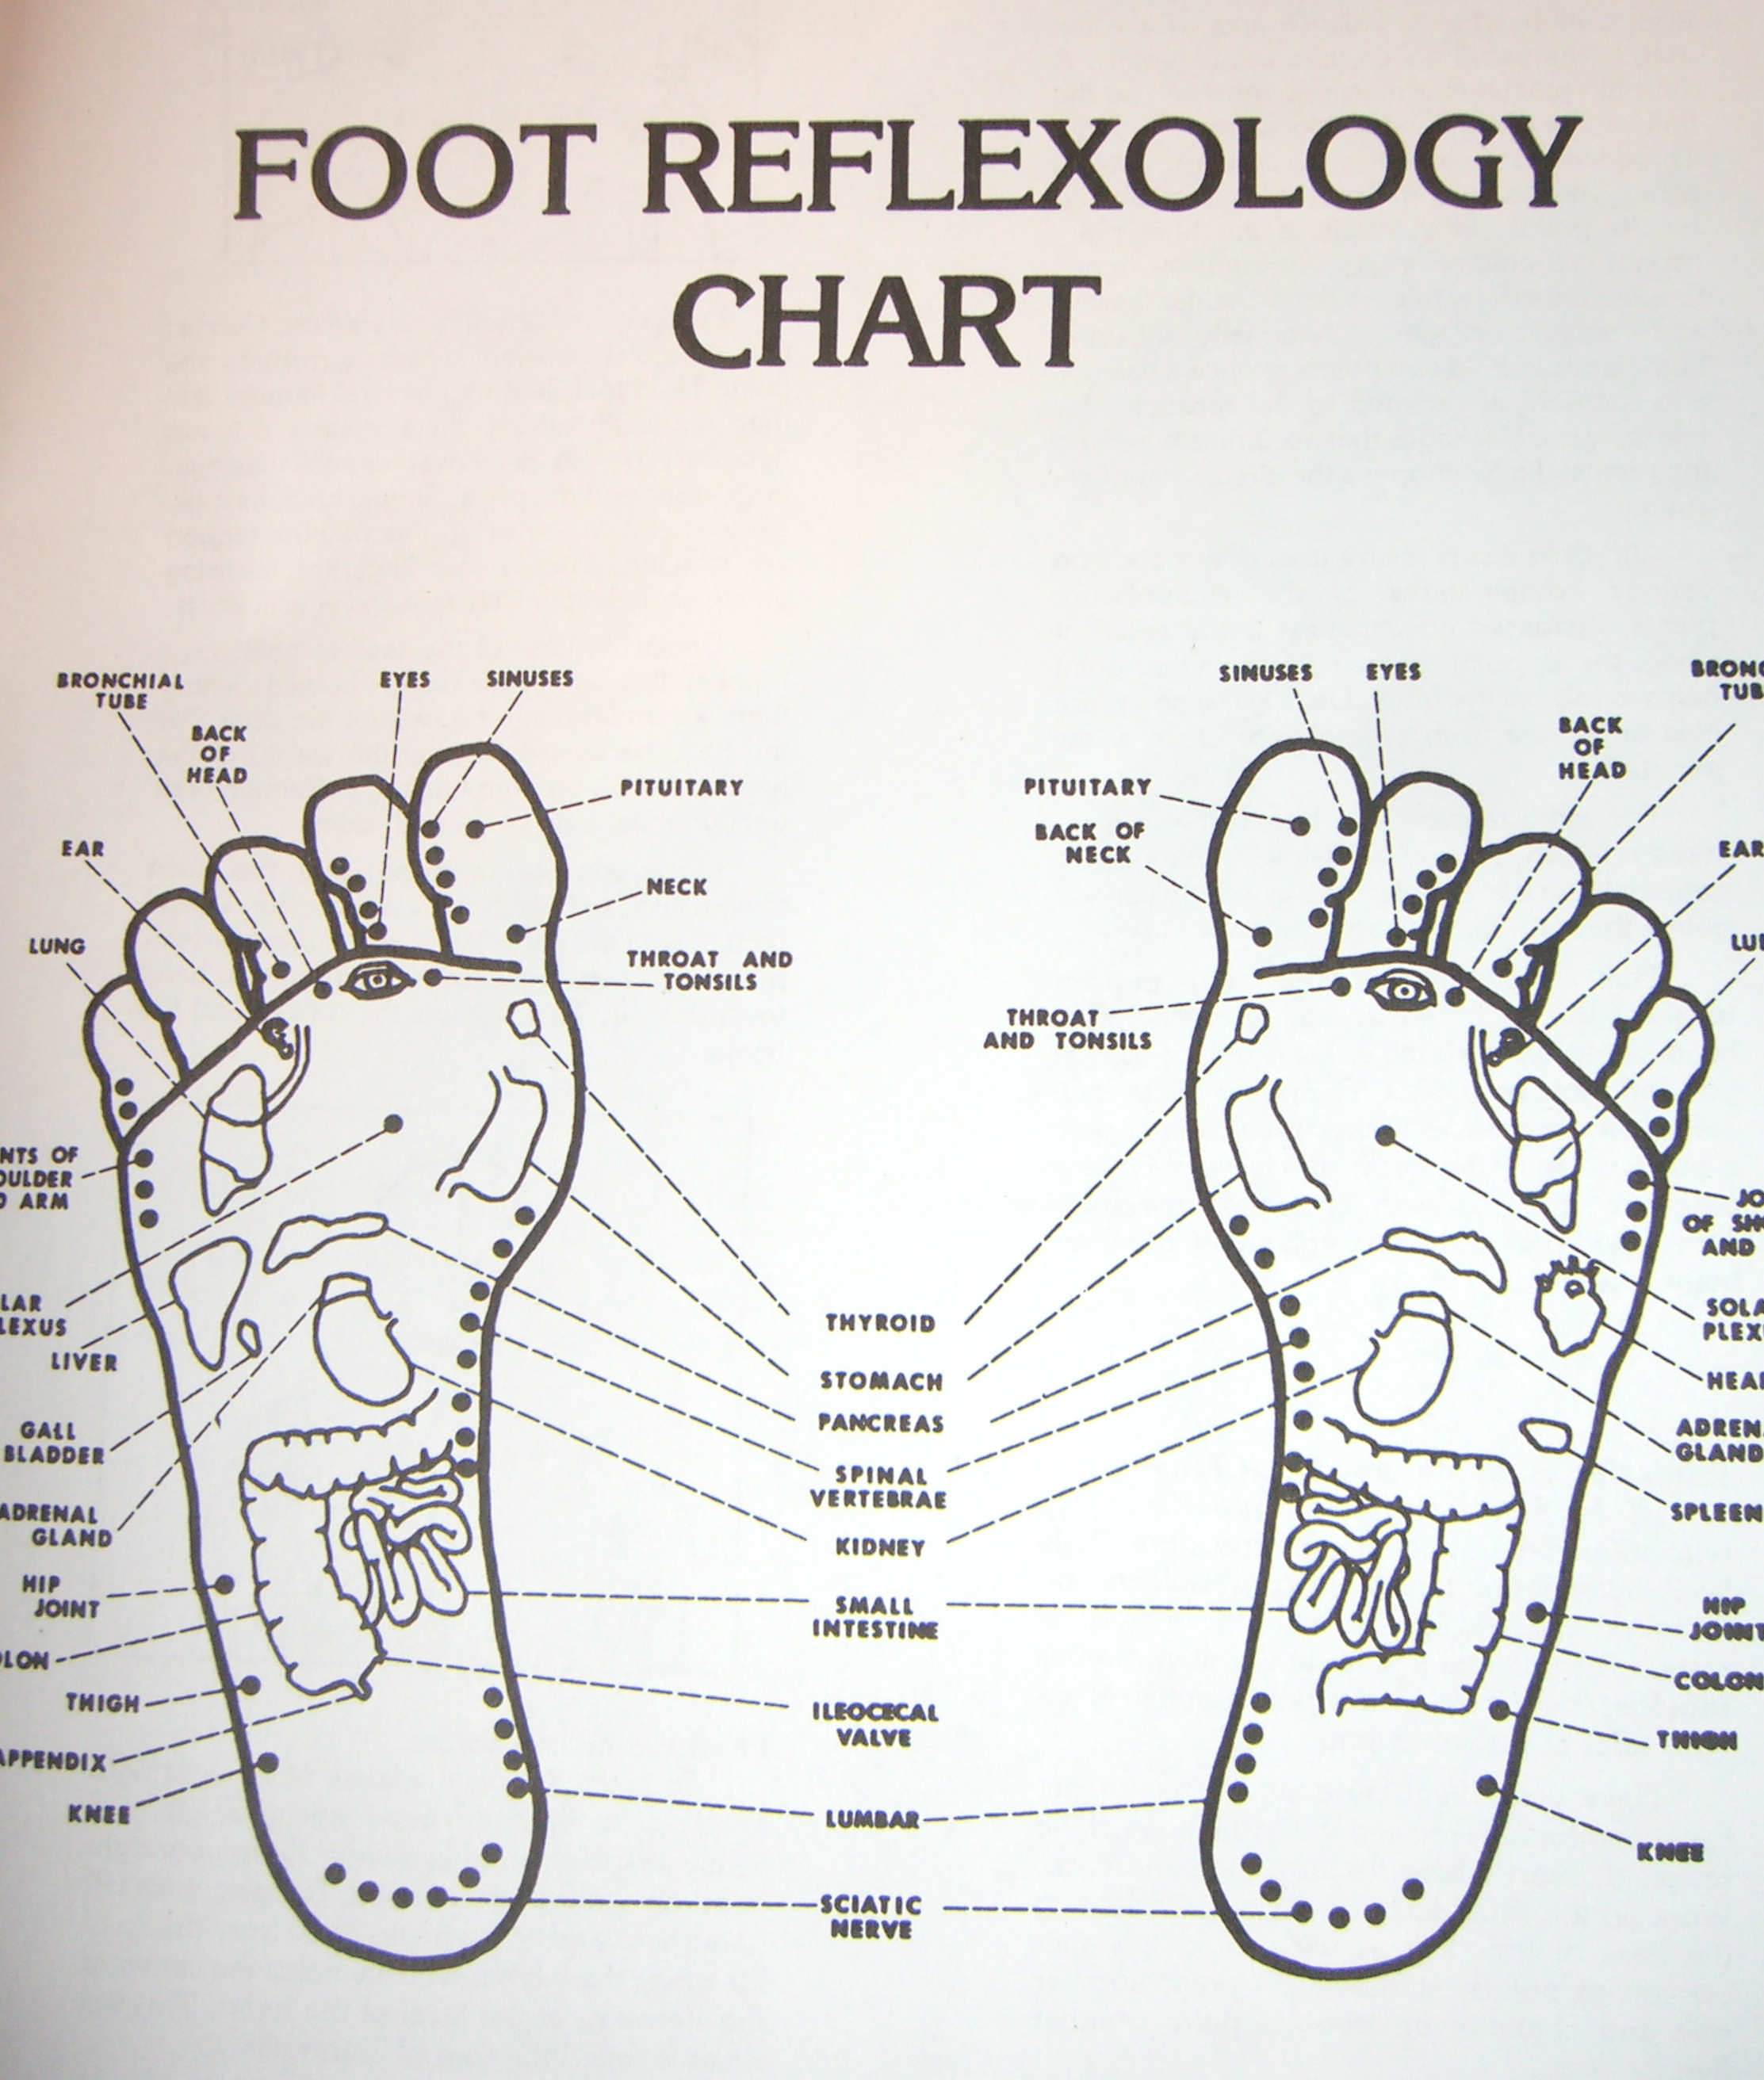 Introduction to Acupressure Points, Qi Gong, SelfAcupressure